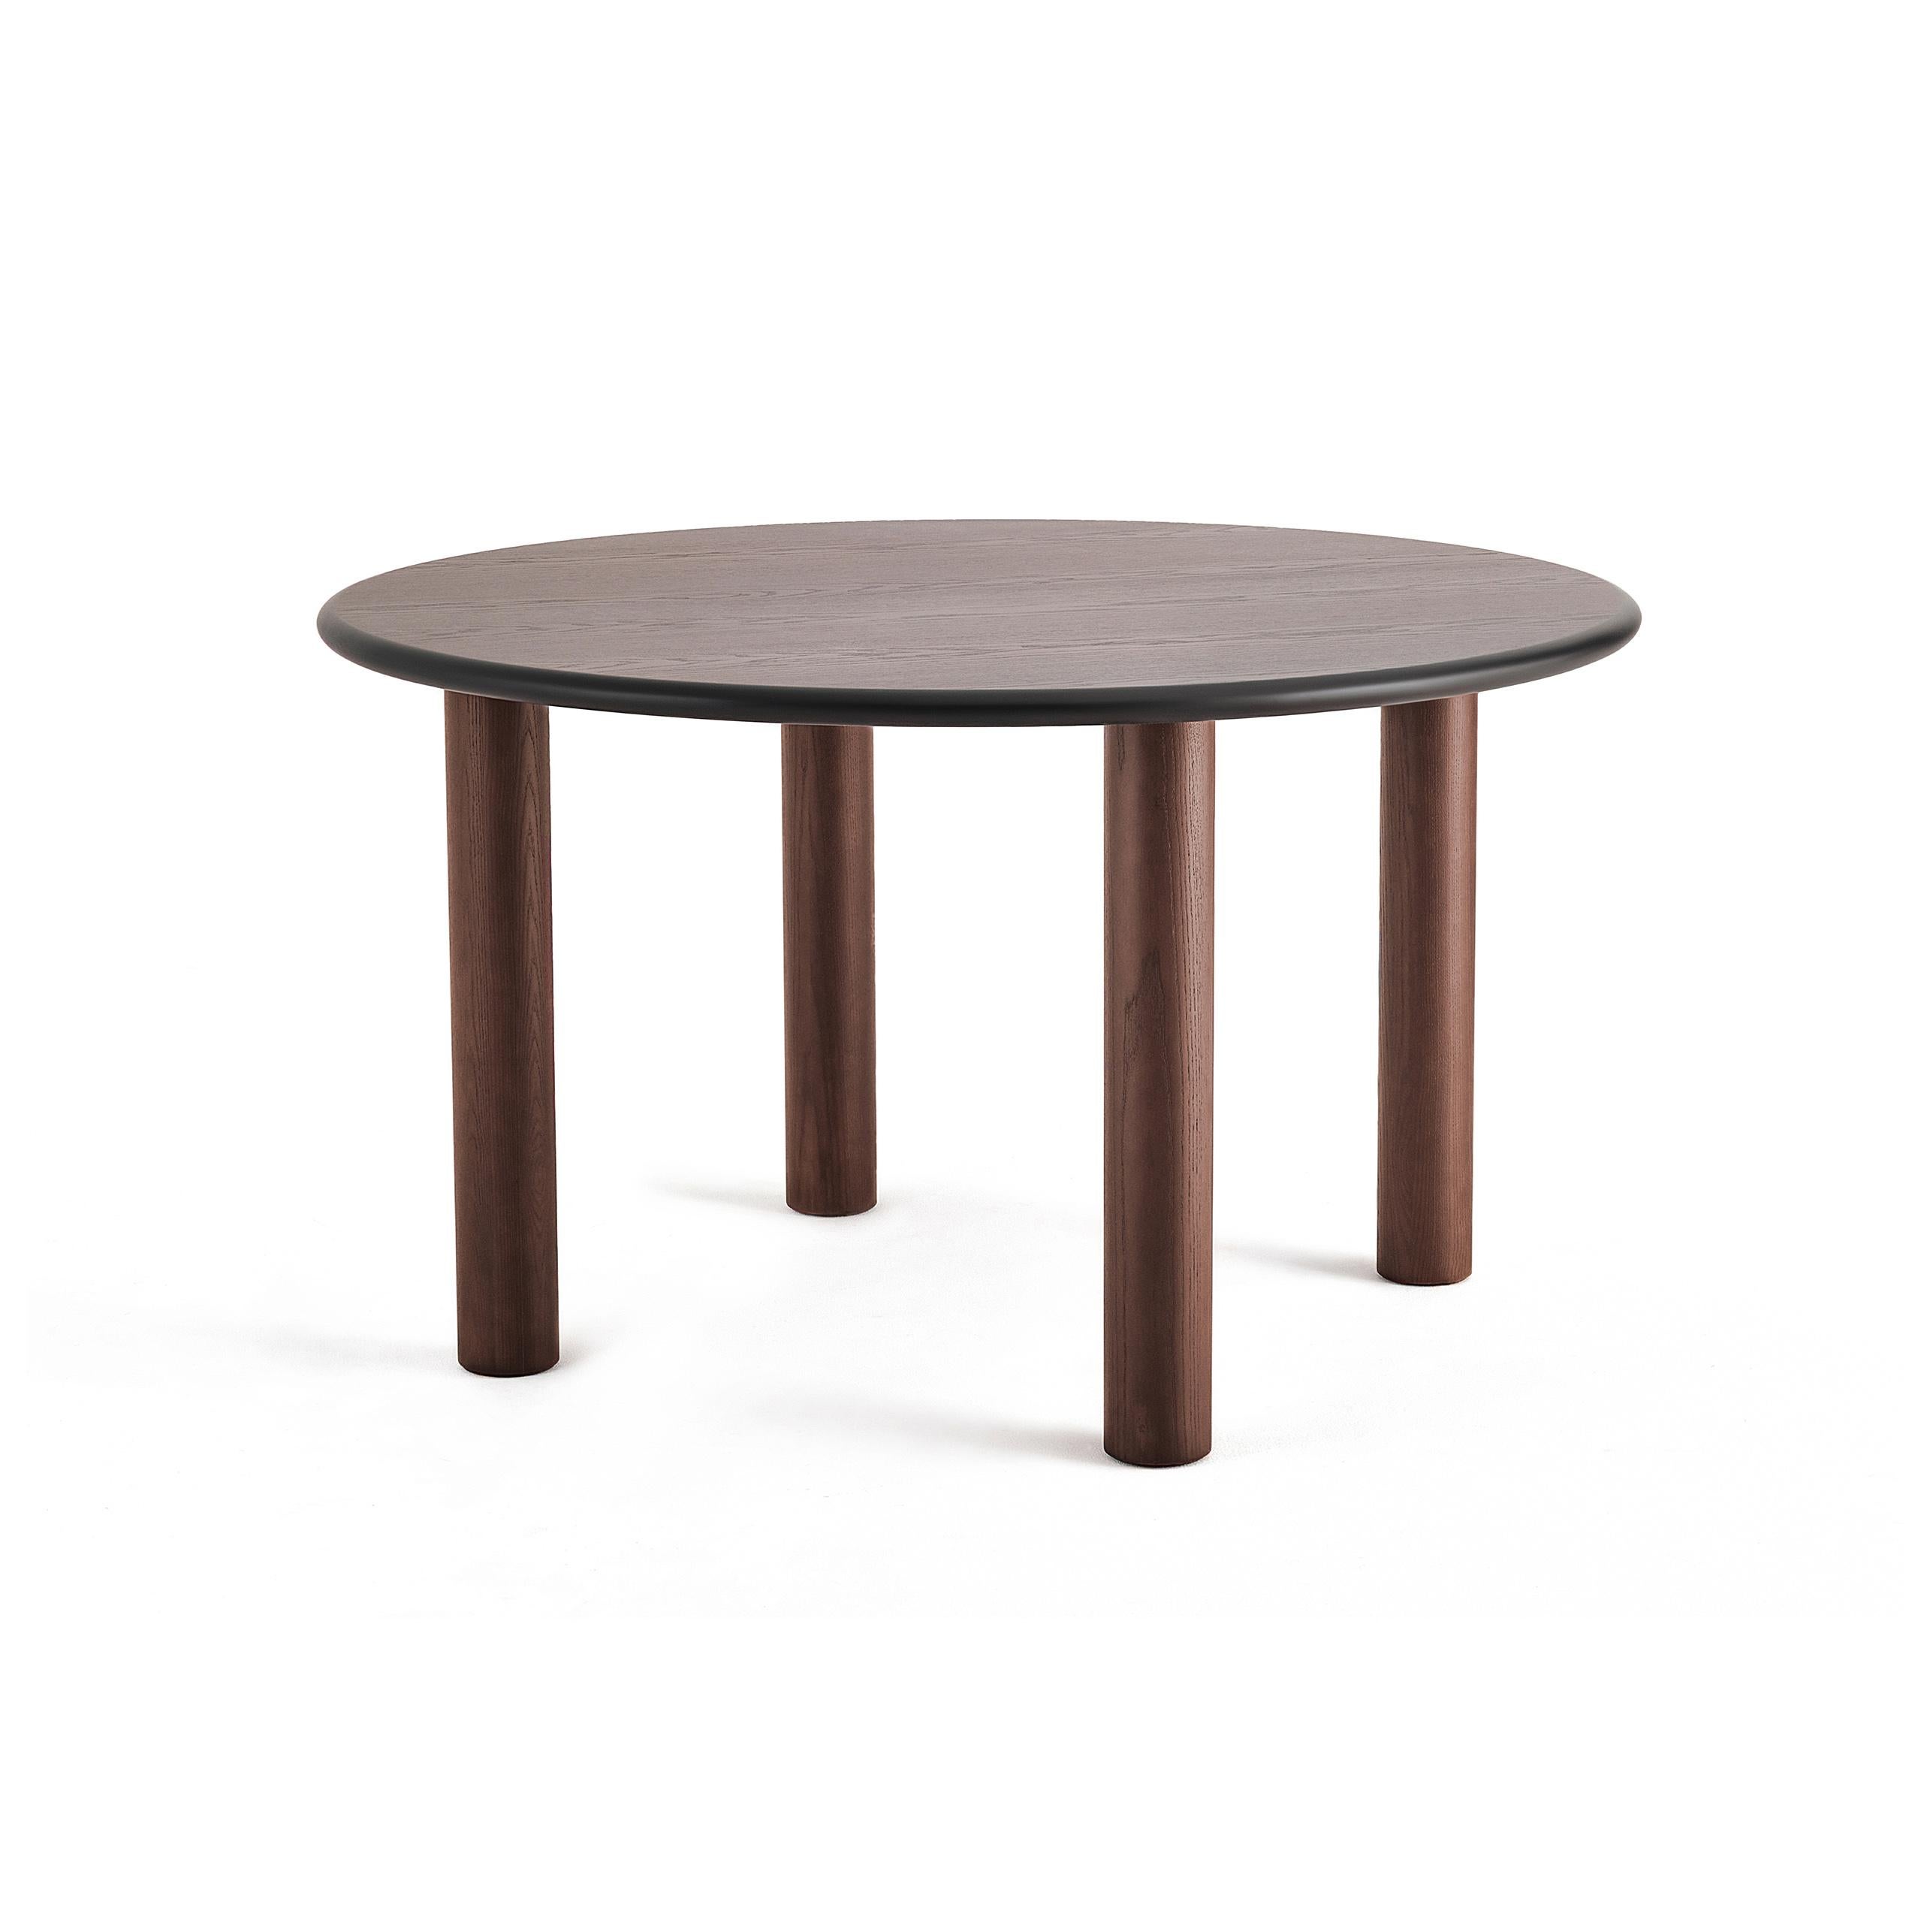 Dining round table 'PAUL' by Noom
Designer: Kateryna Sokolova

Colors: Black stained, Brown stained, Natural

Model shown in picture: Brown. stained 
Dimensions: H 71 cm, Ø 180 cm

The table's design is a 